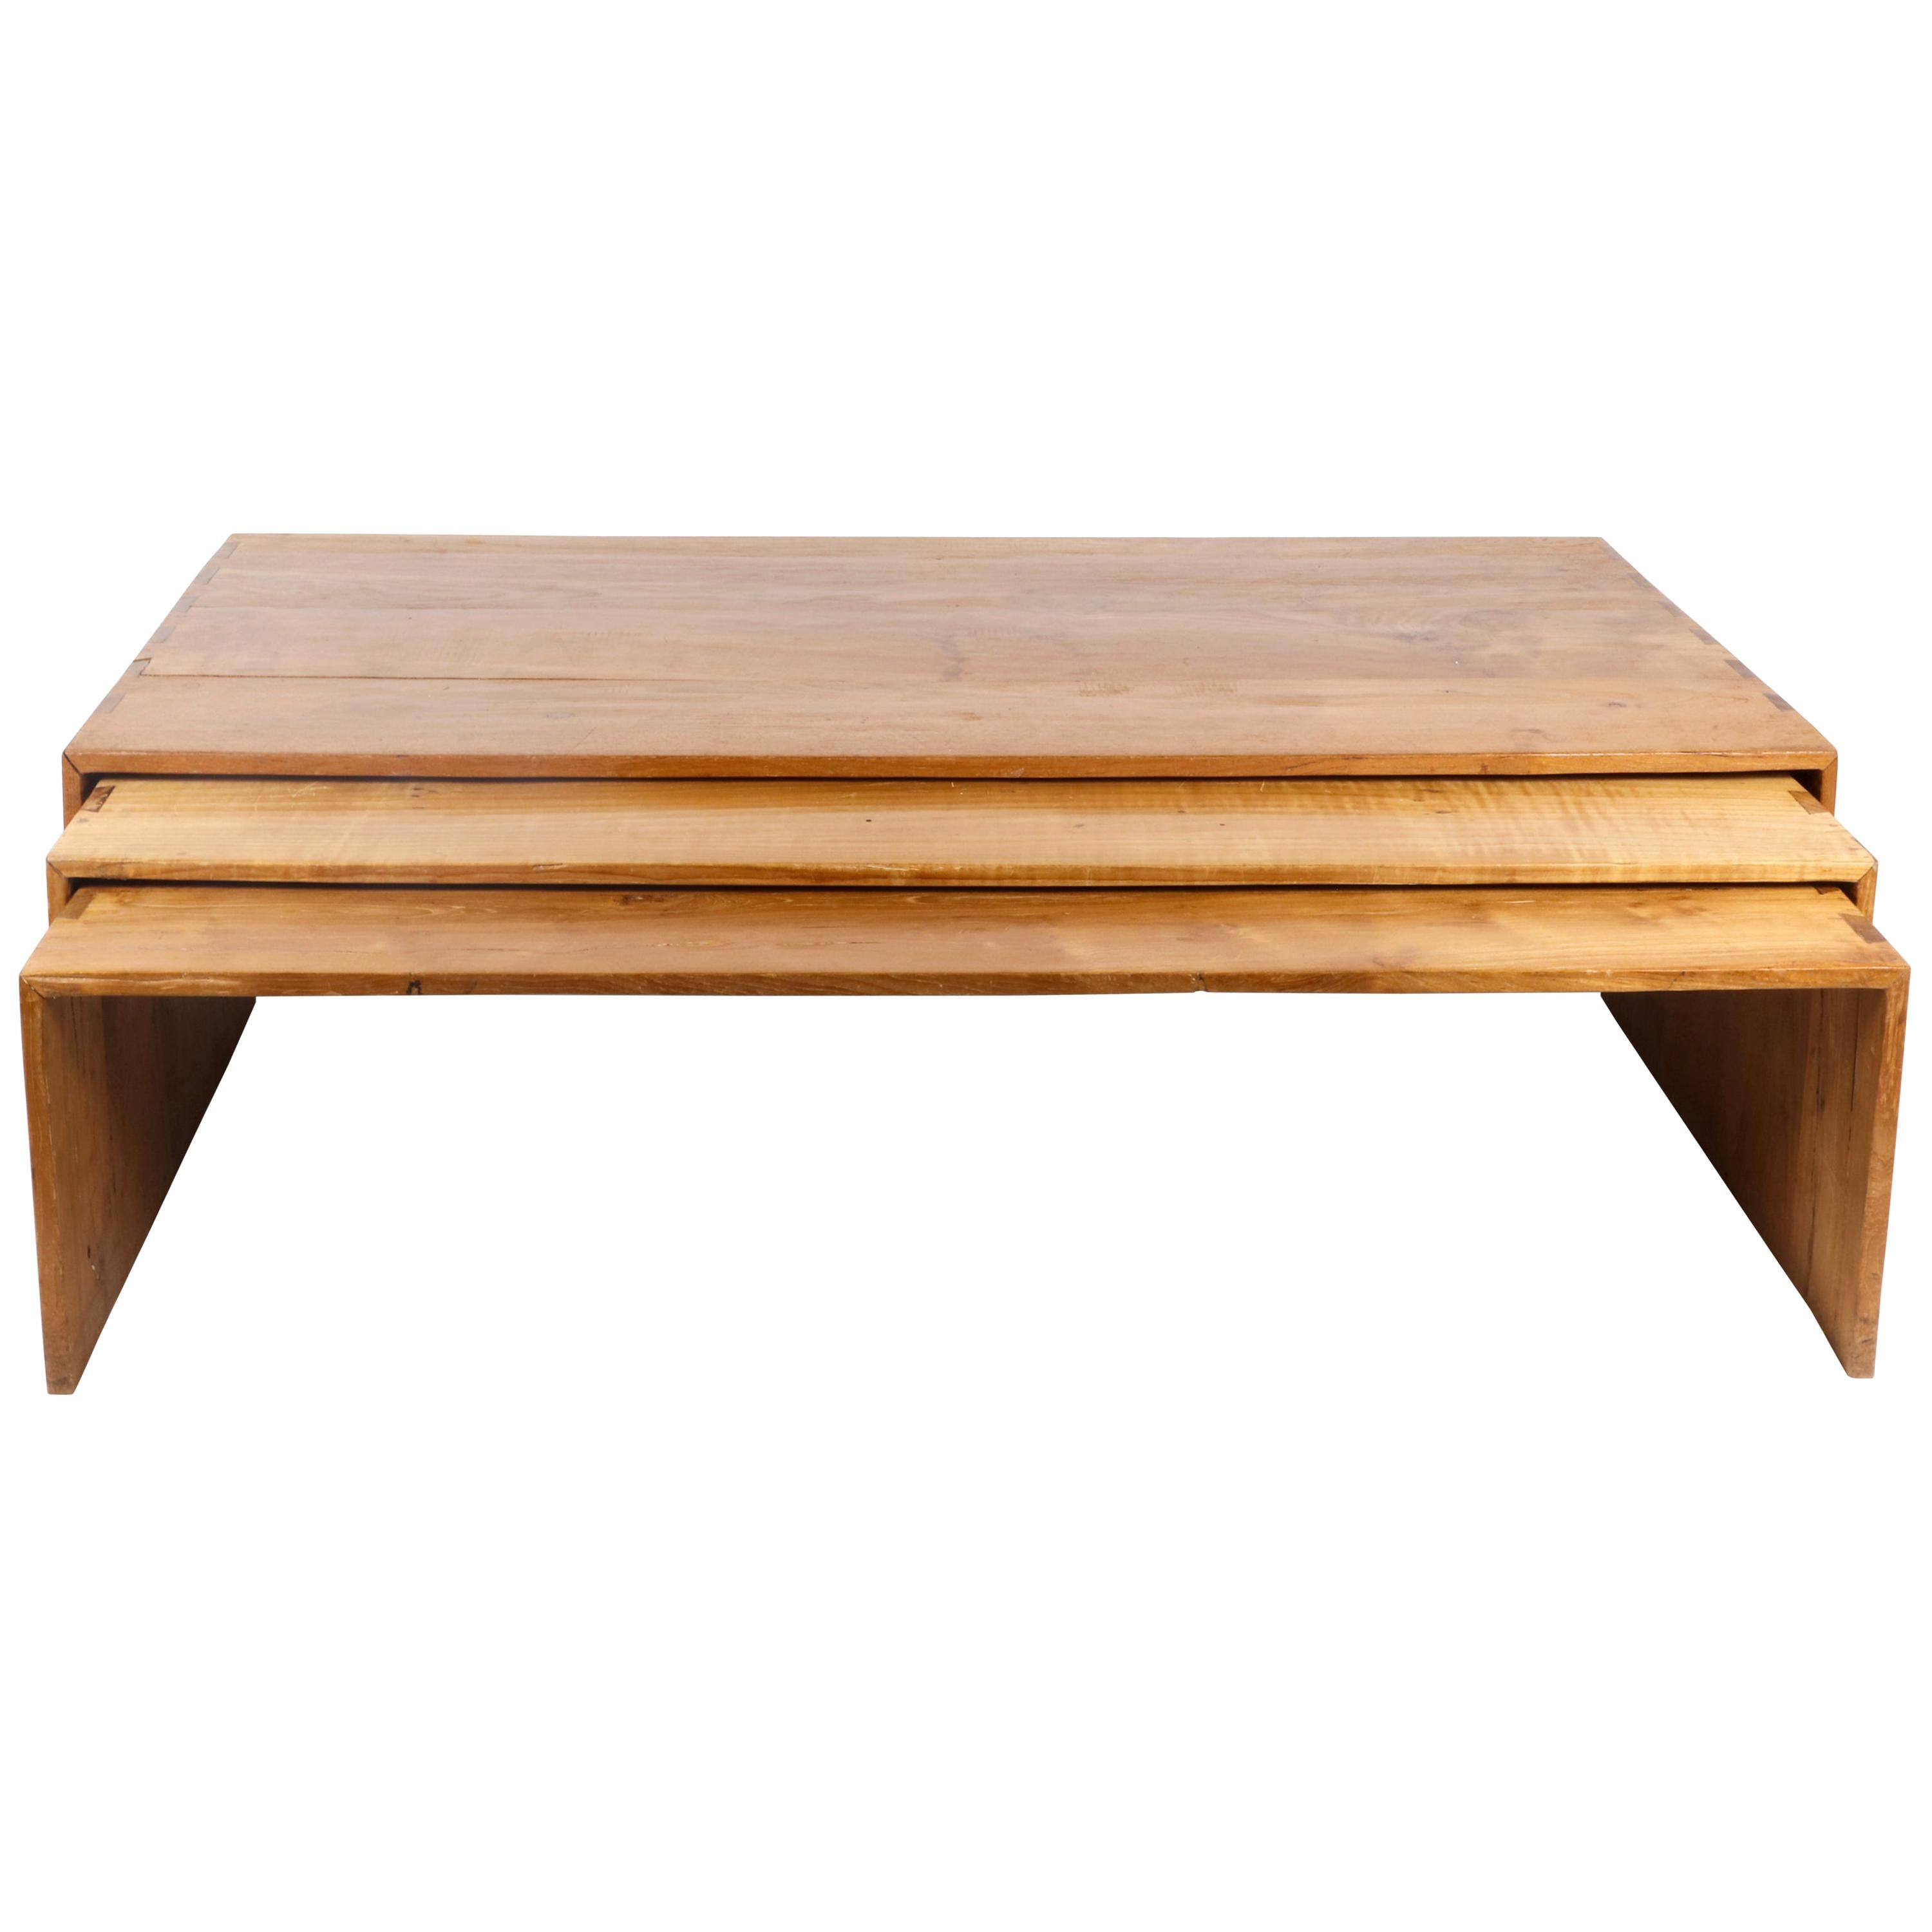 Set of 3 Nesting Wooden Coffee Tables